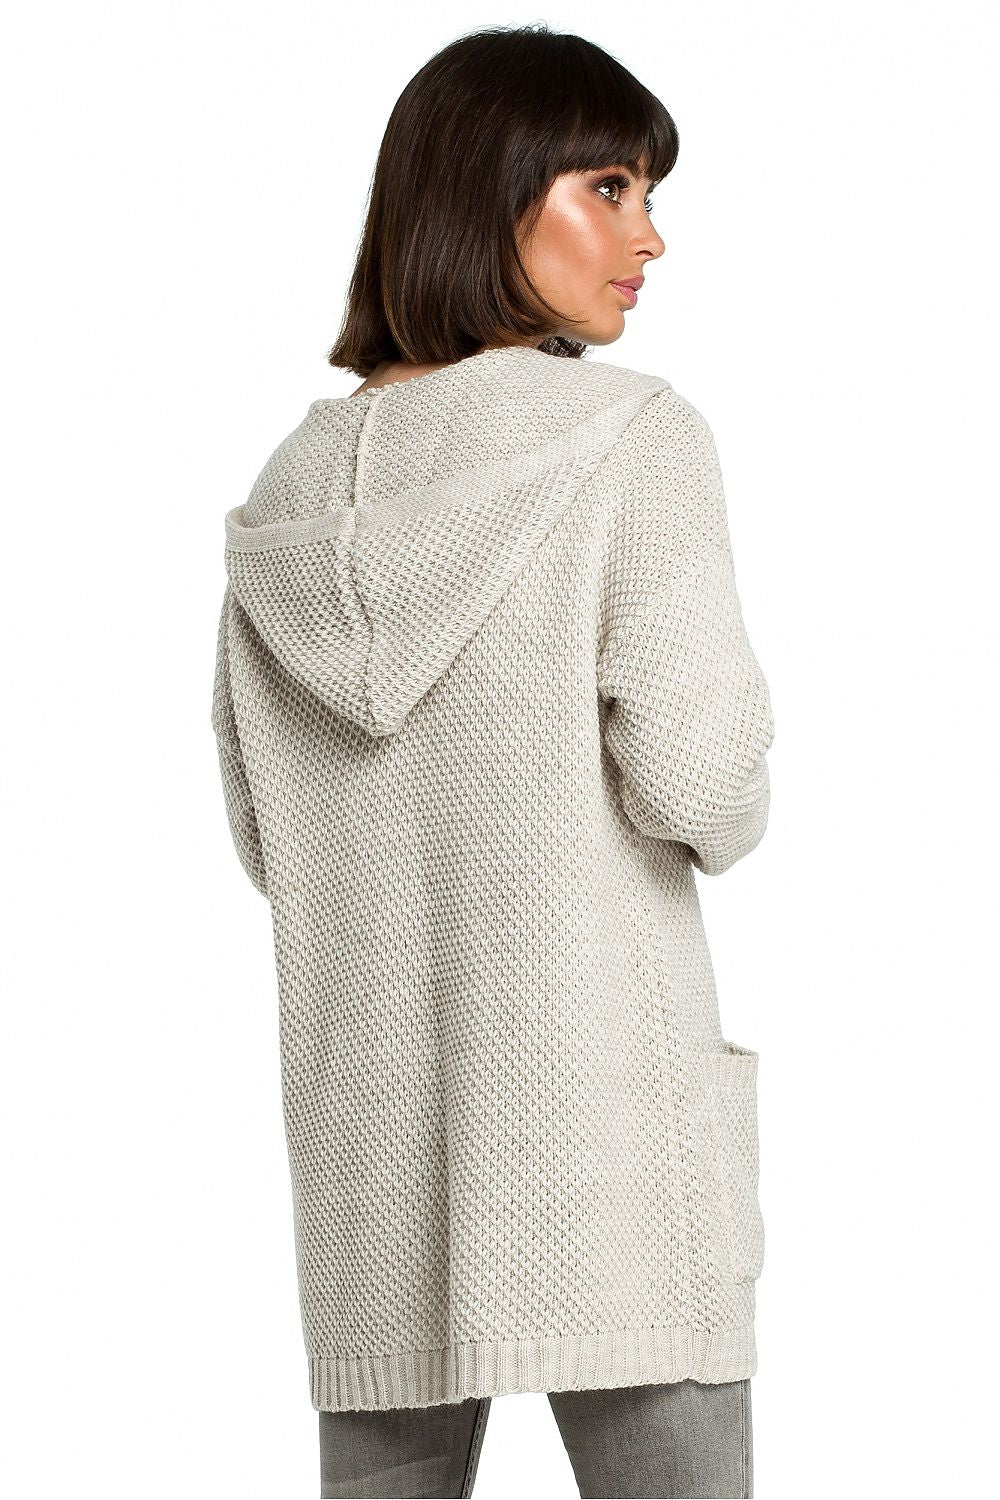 Hooded Cardigan with Pockets in Light Grey